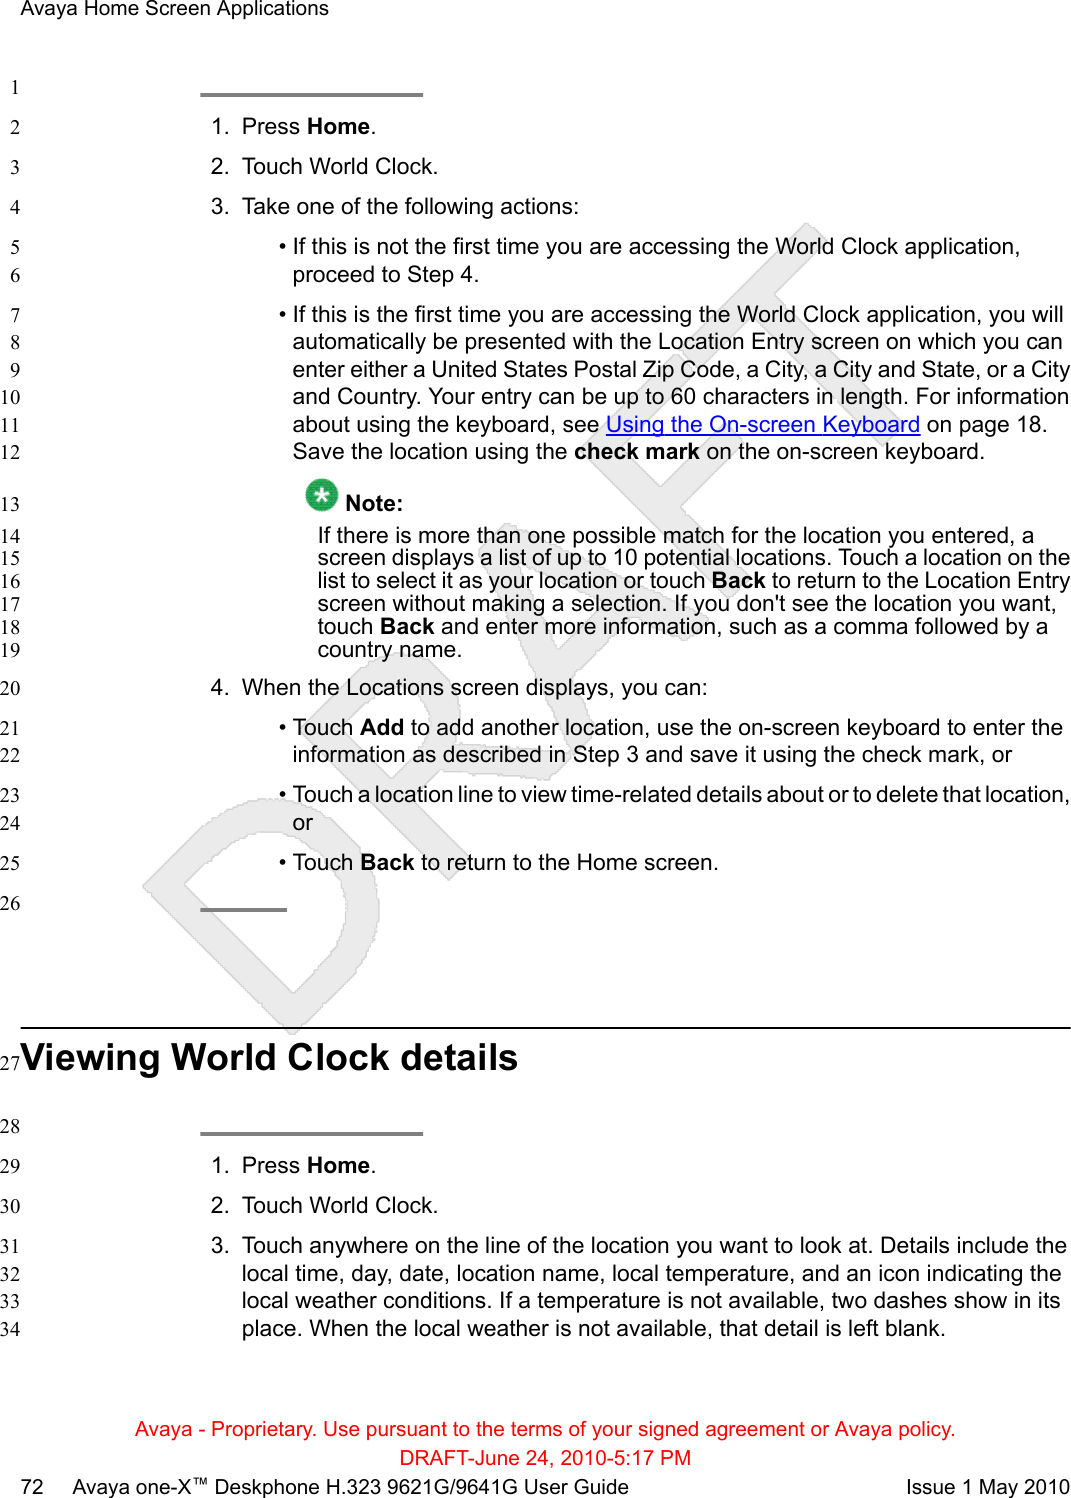 11. Press Home.22. Touch World Clock.33. Take one of the following actions:4• If this is not the first time you are accessing the World Clock application,5proceed to Step 4.6• If this is the first time you are accessing the World Clock application, you will7automatically be presented with the Location Entry screen on which you can8enter either a United States Postal Zip Code, a City, a City and State, or a City9and Country. Your entry can be up to 60 characters in length. For information10about using the keyboard, see Using the On-screen Keyboard on page 18.11Save the location using the check mark on the on-screen keyboard.12 Note:13If there is more than one possible match for the location you entered, a14screen displays a list of up to 10 potential locations. Touch a location on the15list to select it as your location or touch Back to return to the Location Entry16screen without making a selection. If you don&apos;t see the location you want,17touch Back and enter more information, such as a comma followed by a18country name.194. When the Locations screen displays, you can:20• Touch Add to add another location, use the on-screen keyboard to enter the21information as described in Step 3 and save it using the check mark, or22• Touch a location line to view time-related details about or to delete that location,23or24• Touch Back to return to the Home screen.2526Viewing World Clock details27281. Press Home.292. Touch World Clock.303. Touch anywhere on the line of the location you want to look at. Details include the31local time, day, date, location name, local temperature, and an icon indicating the32local weather conditions. If a temperature is not available, two dashes show in its33place. When the local weather is not available, that detail is left blank.34Avaya Home Screen ApplicationsAvaya - Proprietary. Use pursuant to the terms of your signed agreement or Avaya policy.DRAFT-June 24, 2010-5:17 PM72     Avaya one-X™ Deskphone H.323 9621G/9641G User Guide Issue 1 May 2010